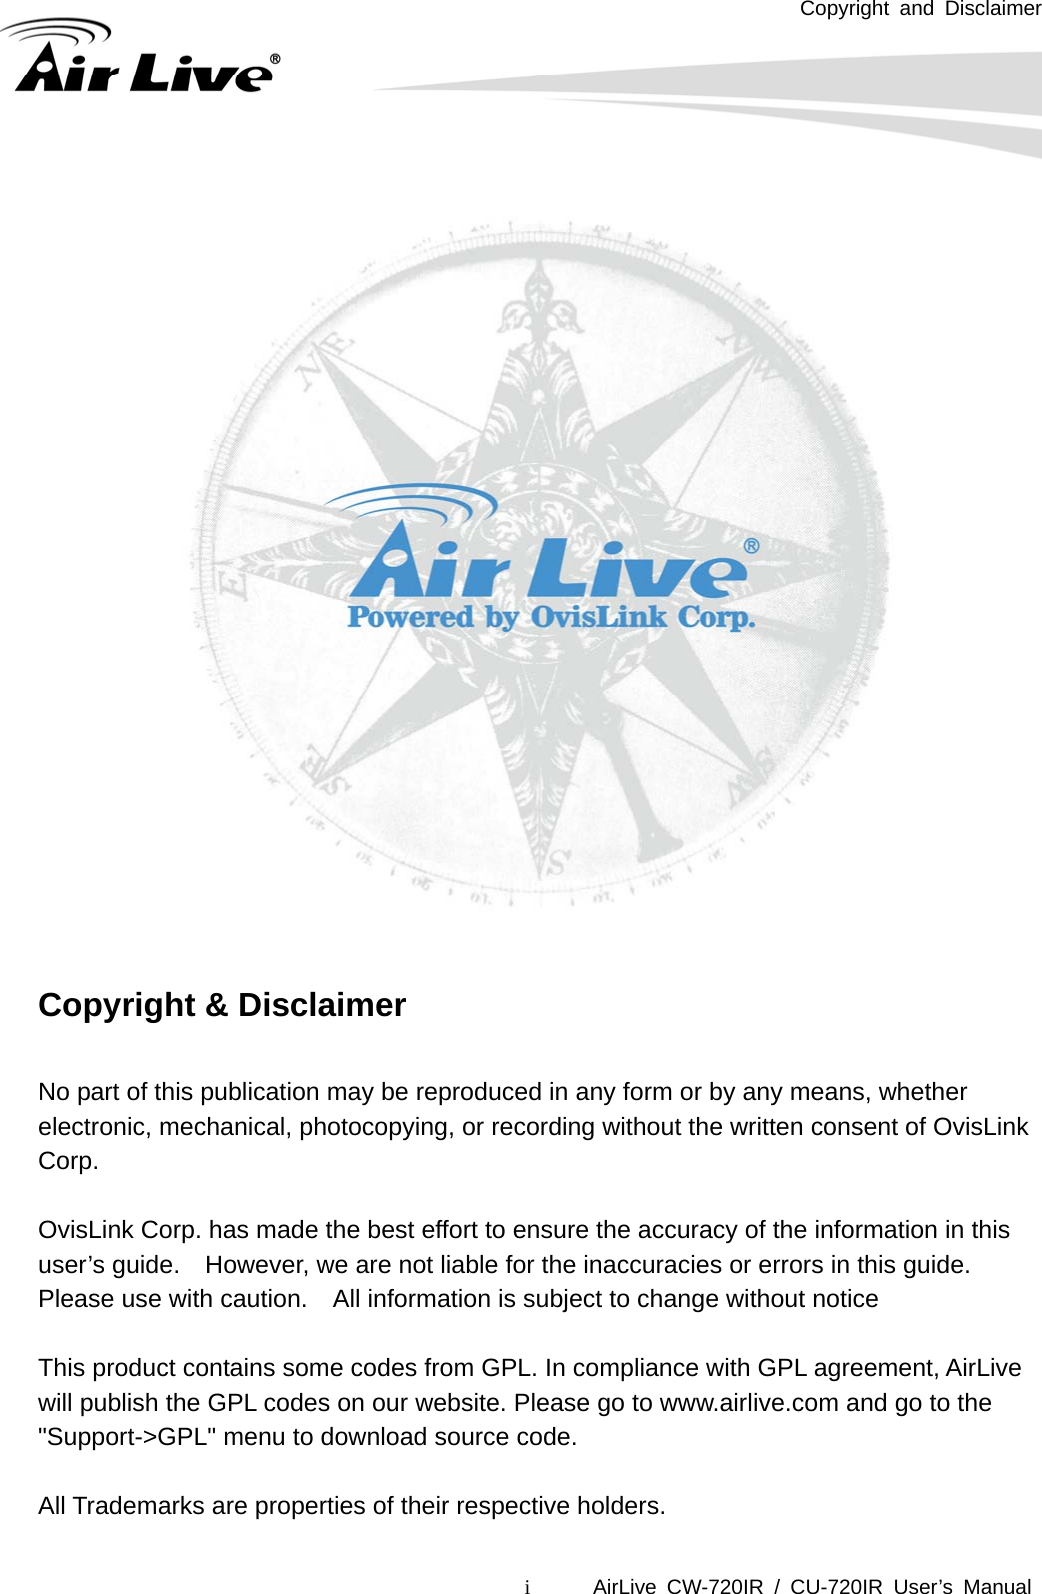 Copyright and Disclaimer i      AirLive CW-720IR / CU-720IR User’s Manual                Copyright &amp; Disclaimer  No part of this publication may be reproduced in any form or by any means, whether electronic, mechanical, photocopying, or recording without the written consent of OvisLink Corp.   OvisLink Corp. has made the best effort to ensure the accuracy of the information in this user’s guide.    However, we are not liable for the inaccuracies or errors in this guide.   Please use with caution.    All information is subject to change without notice  This product contains some codes from GPL. In compliance with GPL agreement, AirLive will publish the GPL codes on our website. Please go to www.airlive.com and go to the &quot;Support-&gt;GPL&quot; menu to download source code.  All Trademarks are properties of their respective holders.  